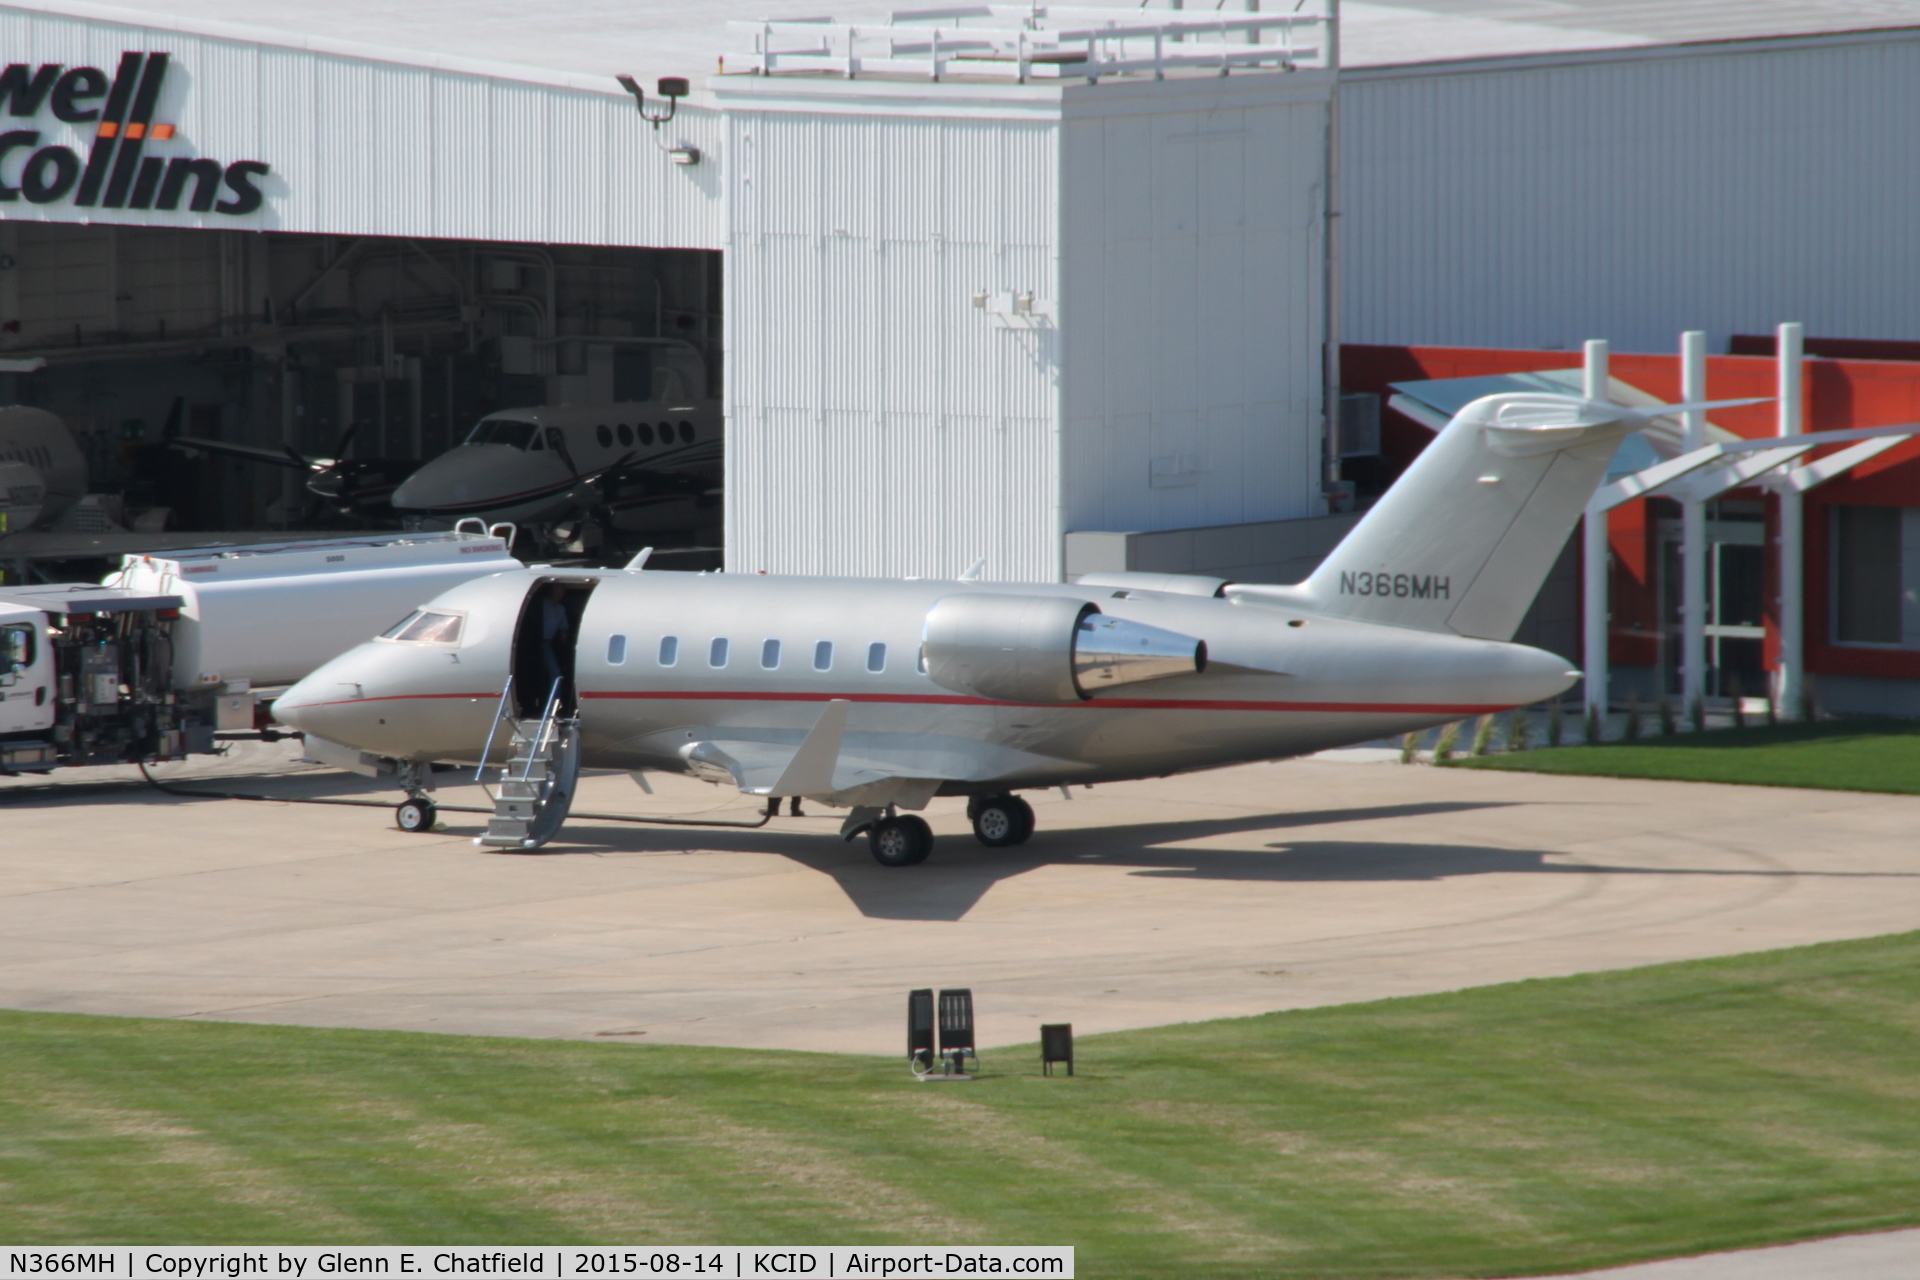 N366MH, 2009 Bombardier Challenger 605 (CL-600-2B16) C/N 5797, On the Rockwell-Collins Ramp